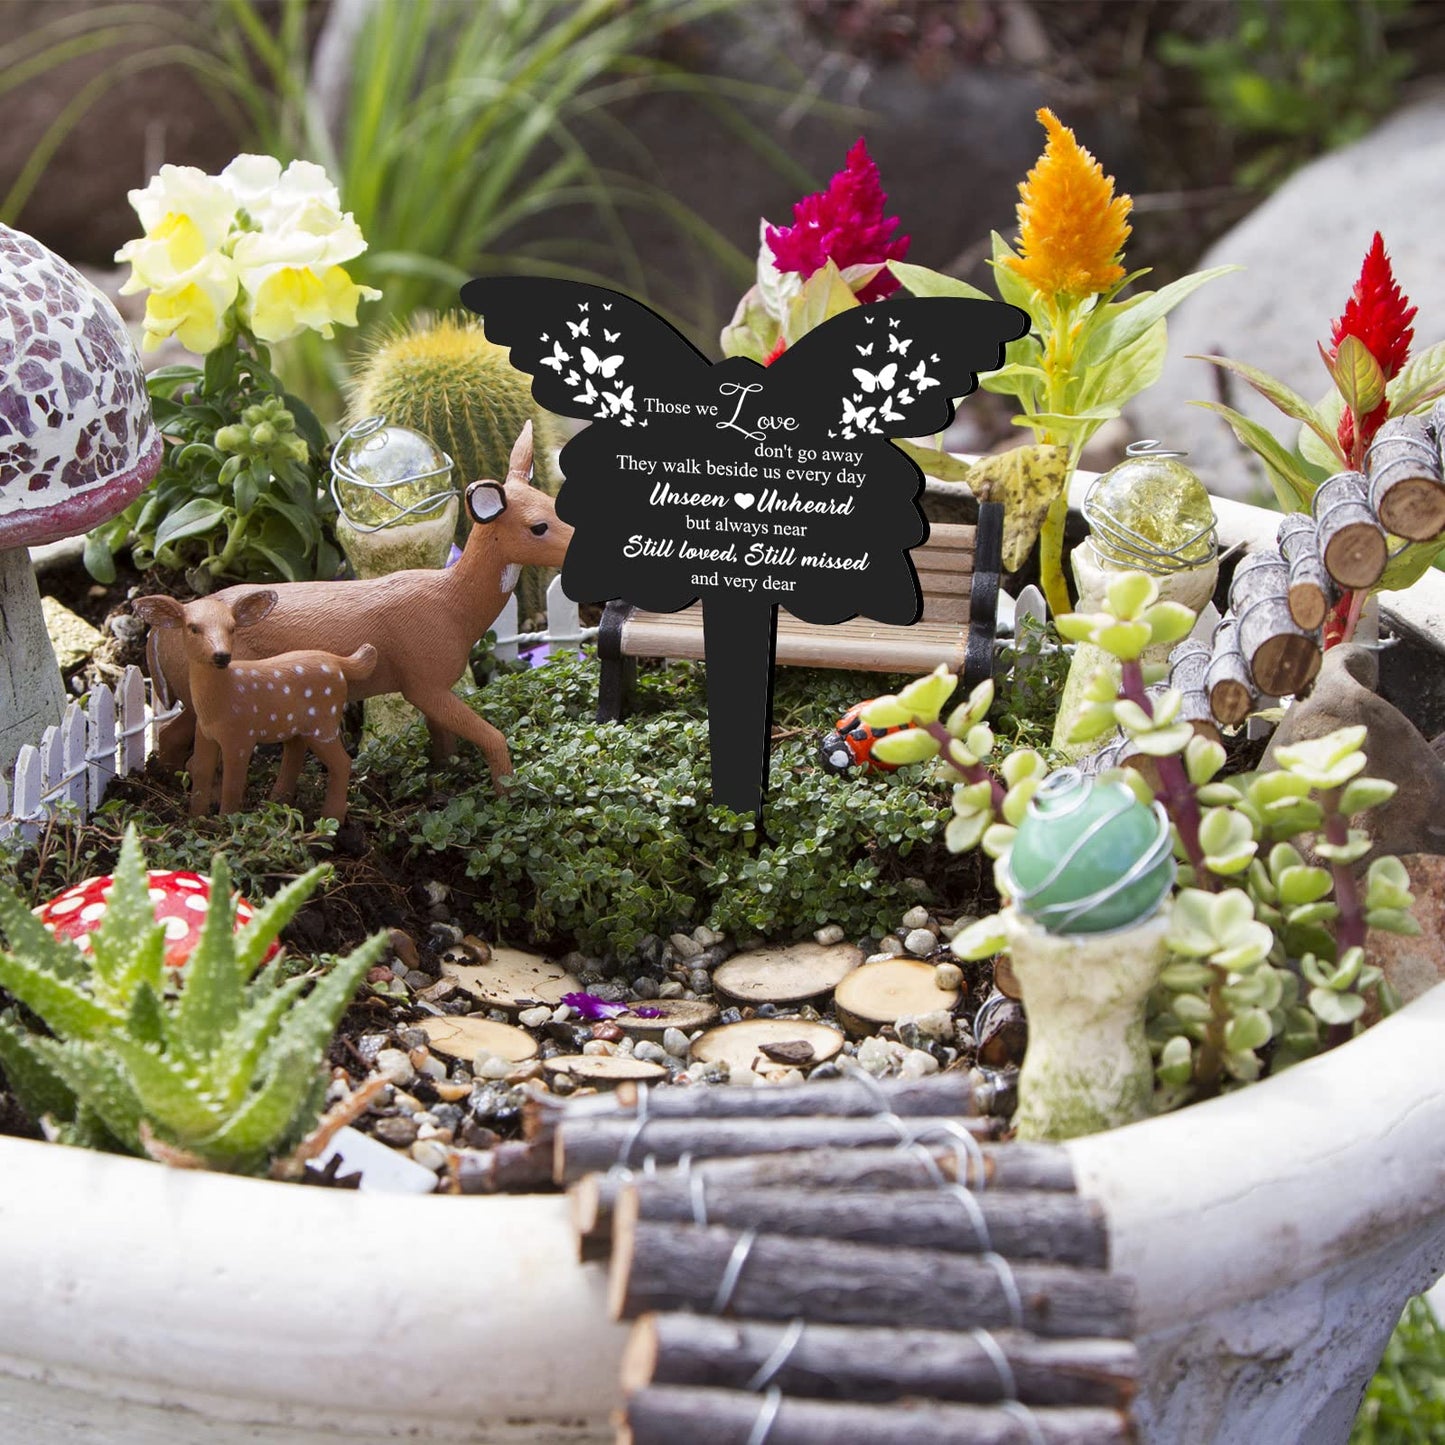 Roowest Butterfly Grave Decorations for Cemetery, Those We Love Don't Go Away Memorial Butterfly Garden Stake, Grave Markers for Humans Black Sympathy Garden Stake for Outdoors Yard Decor